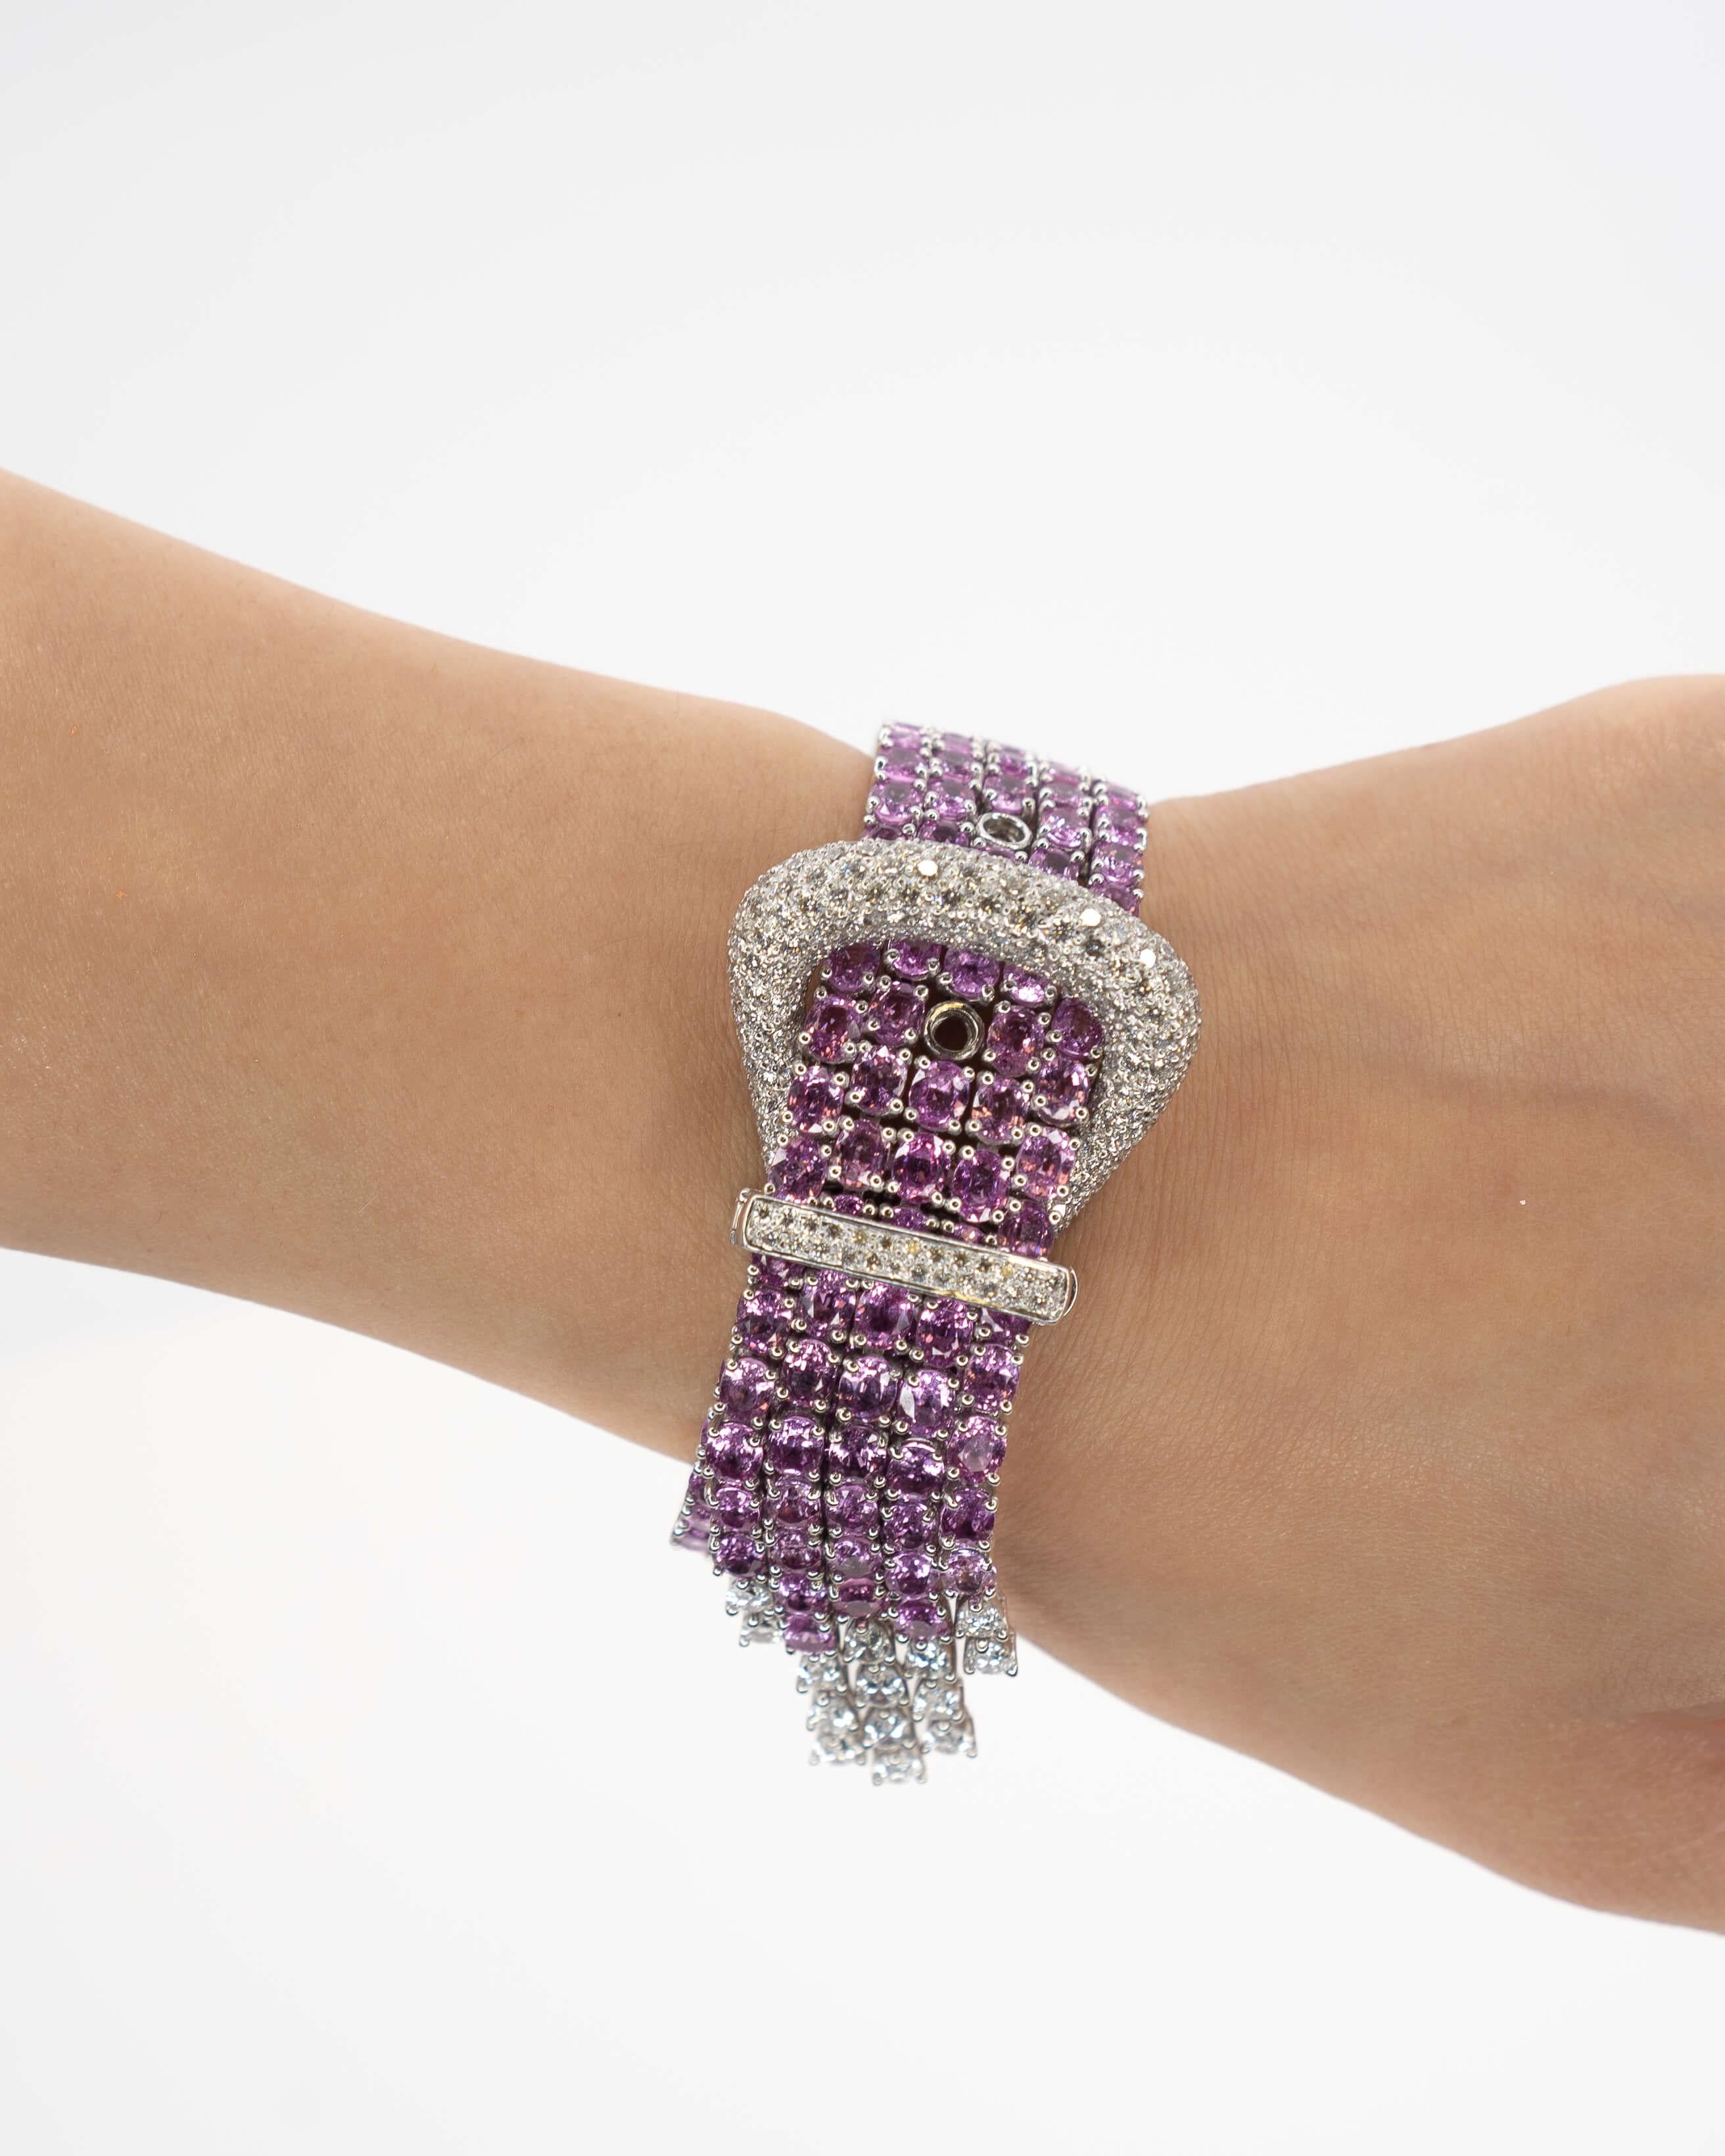 A one of a kind jewelry piece that is like no other. This buckle bracelet sits perfectly on the arm and is filled with rich vibrant color and brilliant diamonds that dance so perfectly! 

18K gold, diamond and pink sapphire bracelet mounted with